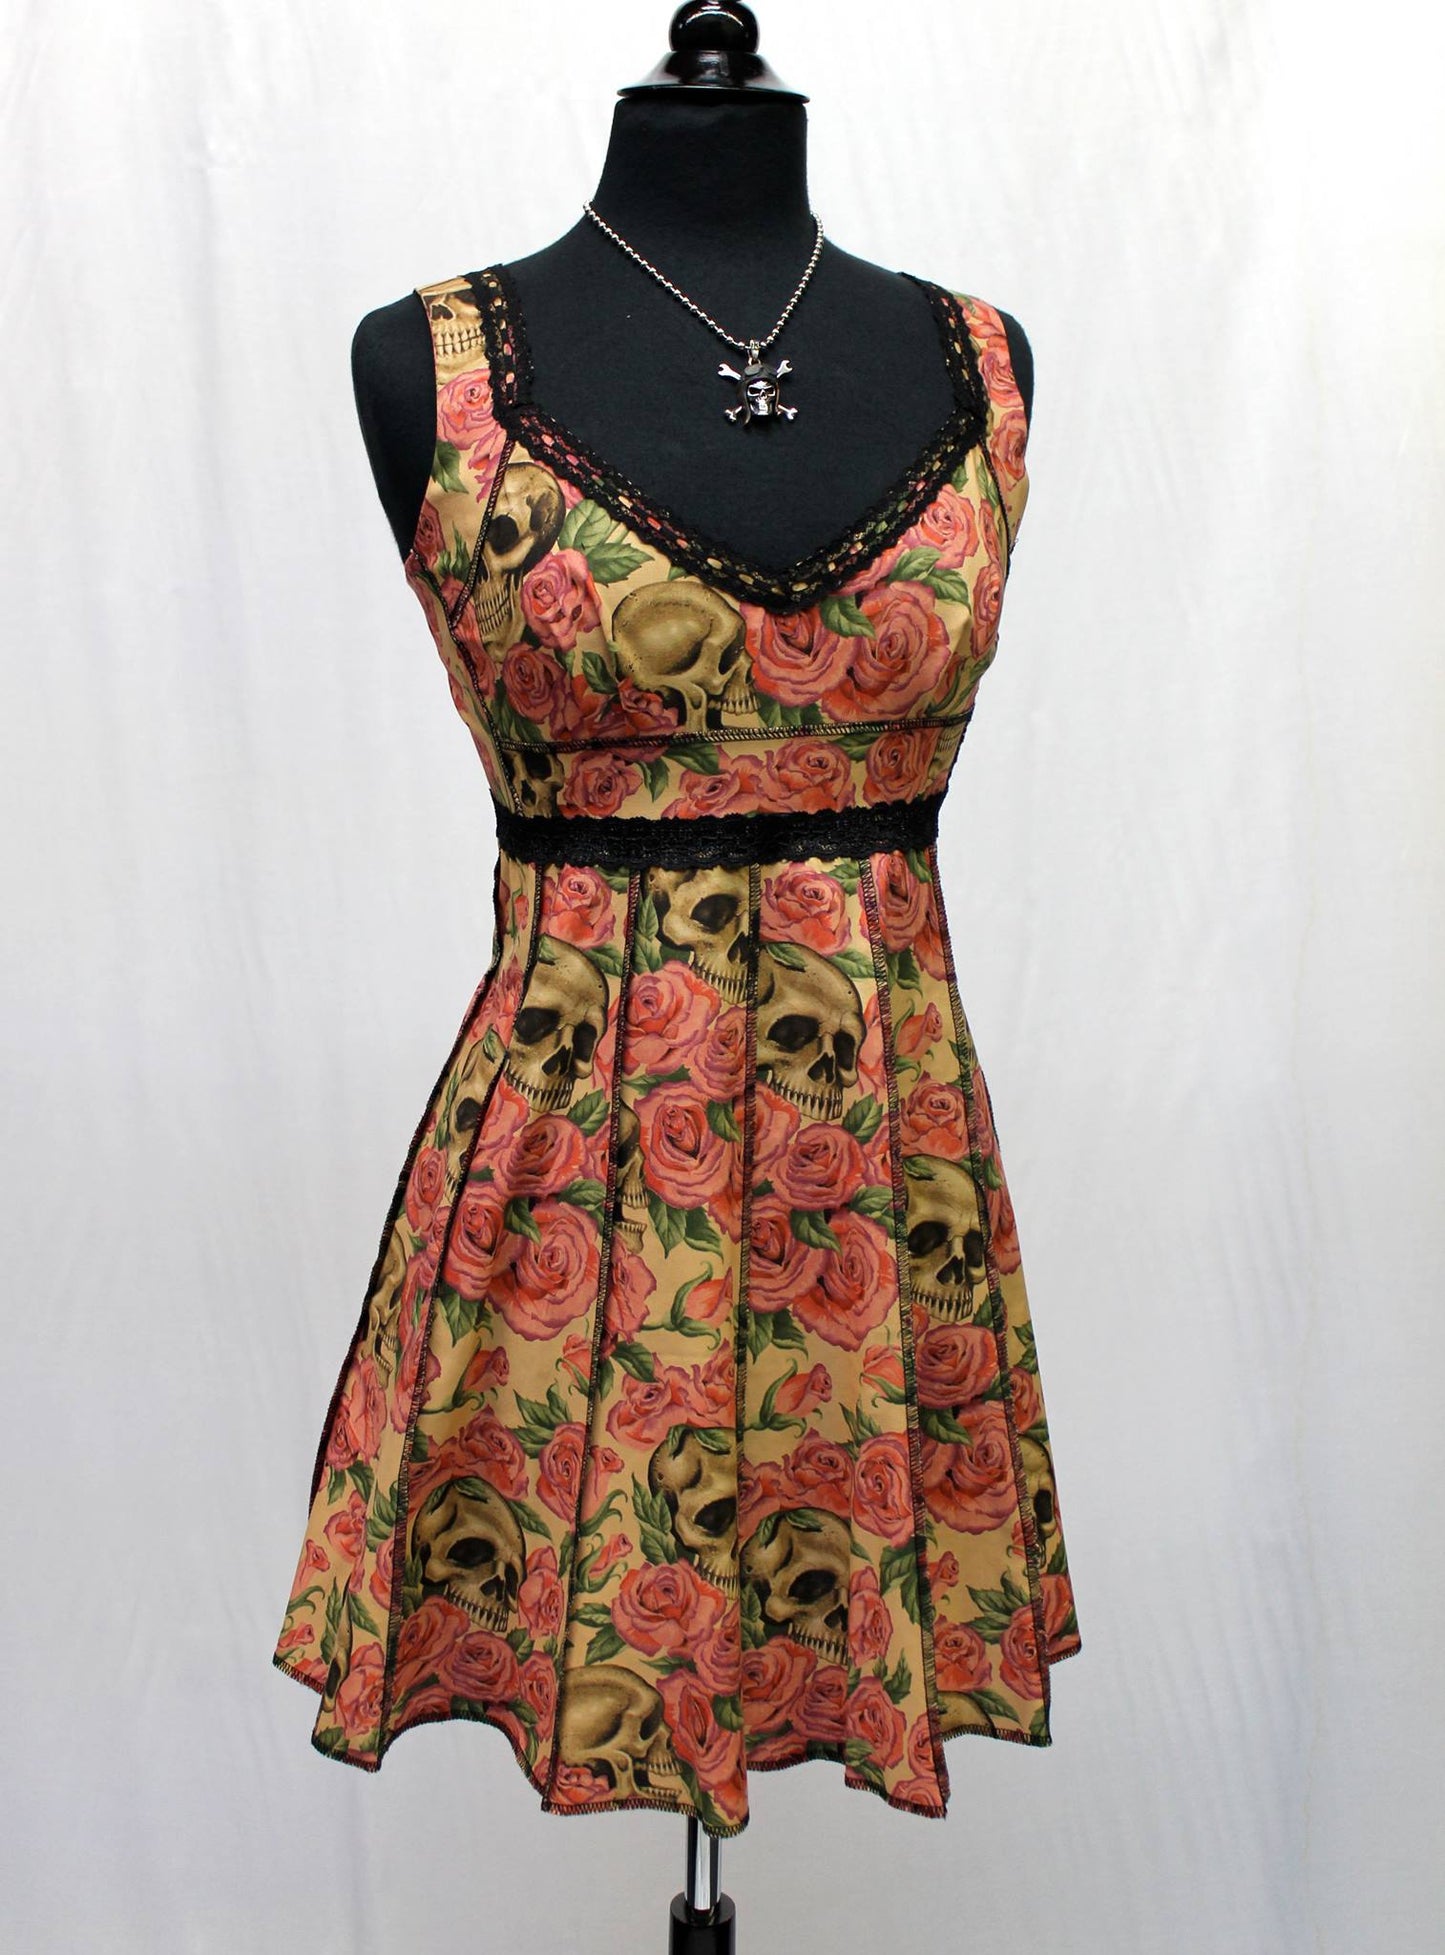 VINTAGE STYLE COCKTAIL DRESS - SKULL AND ROSE PRINT